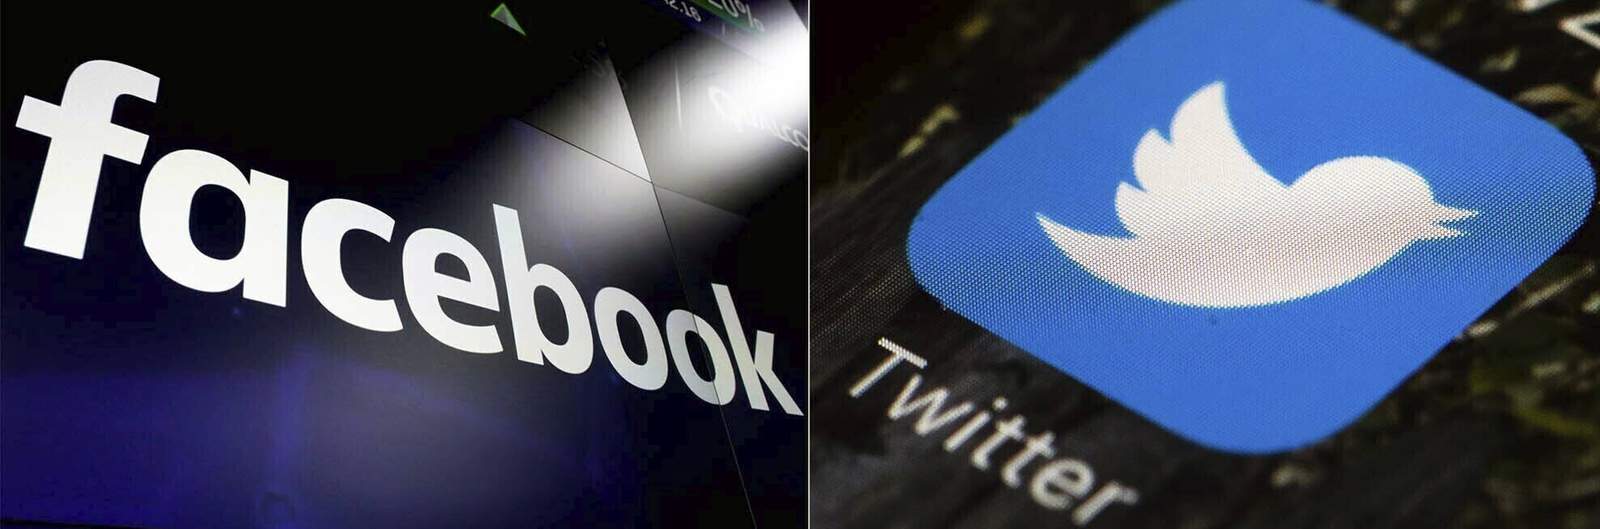 Facebook, Twitter CEOs ordered to testify by GOP senators